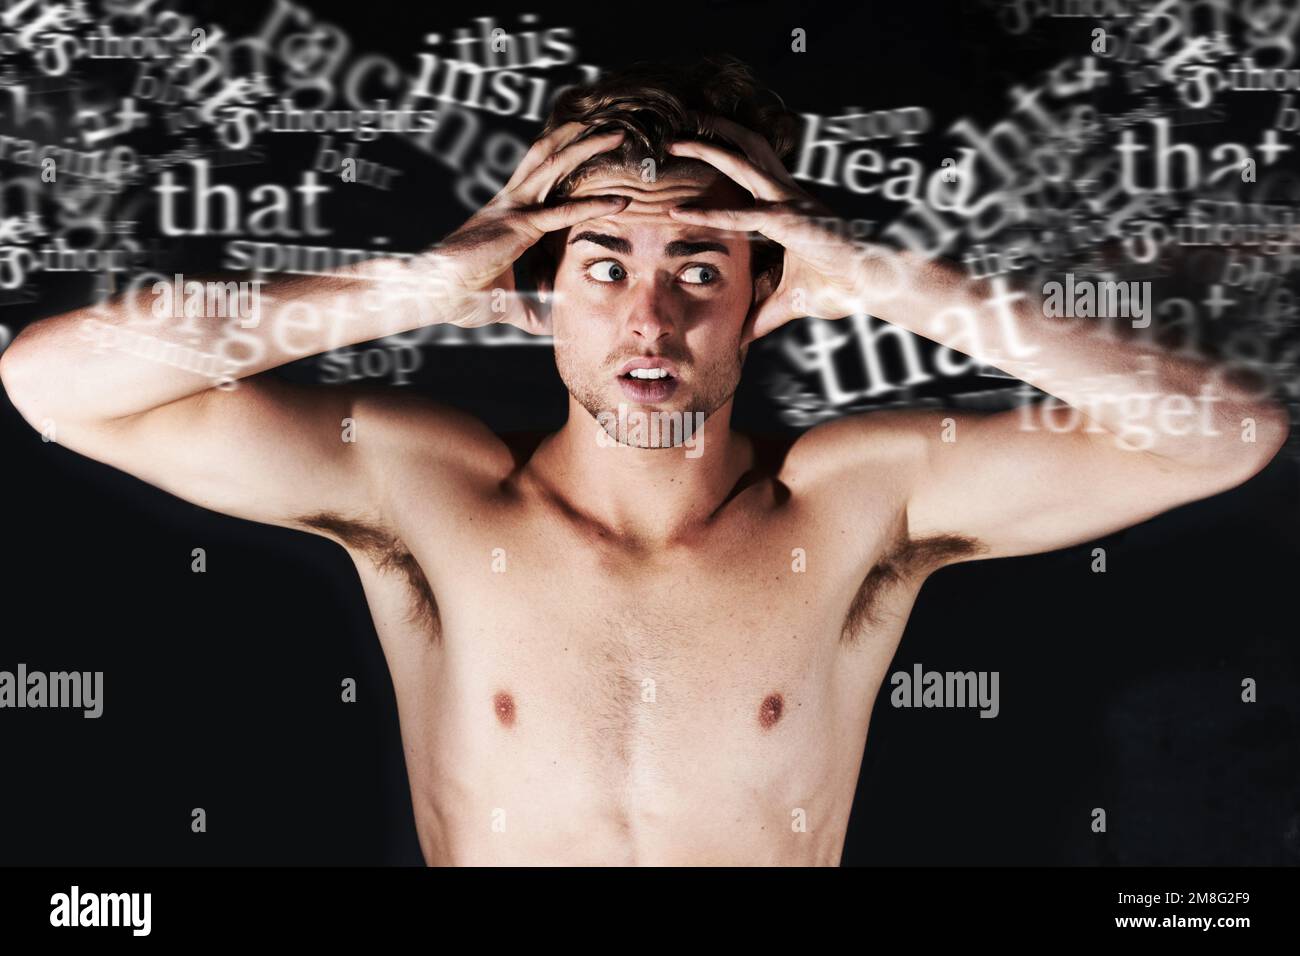 Hes hearing voices. A young man holding his head surrounded by words. Stock Photo